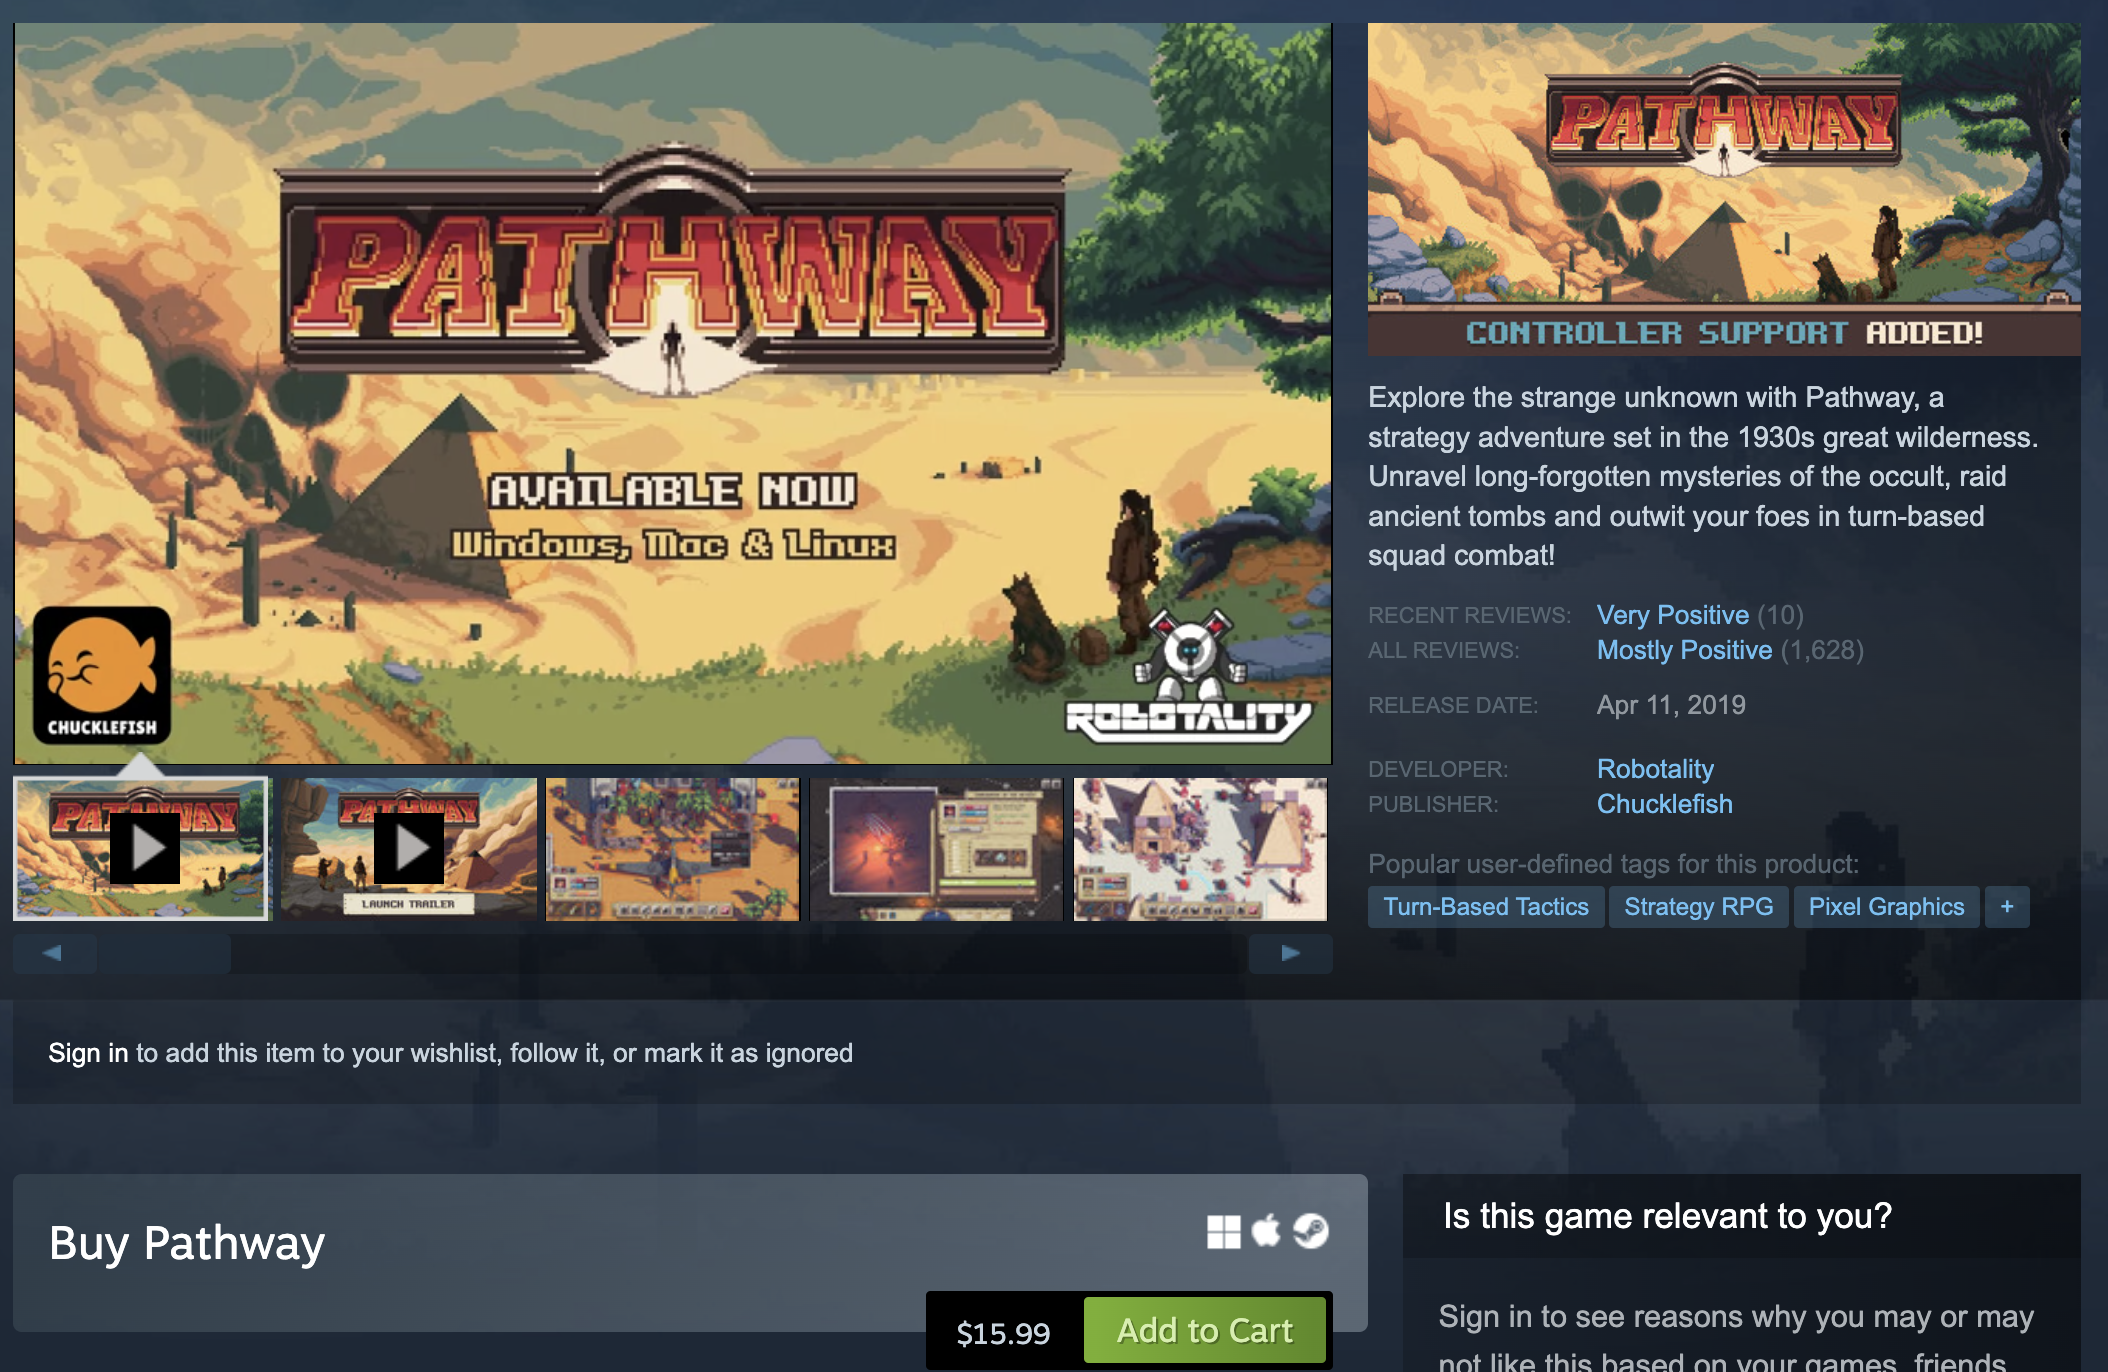 Steam Game Page With Reviews and Price